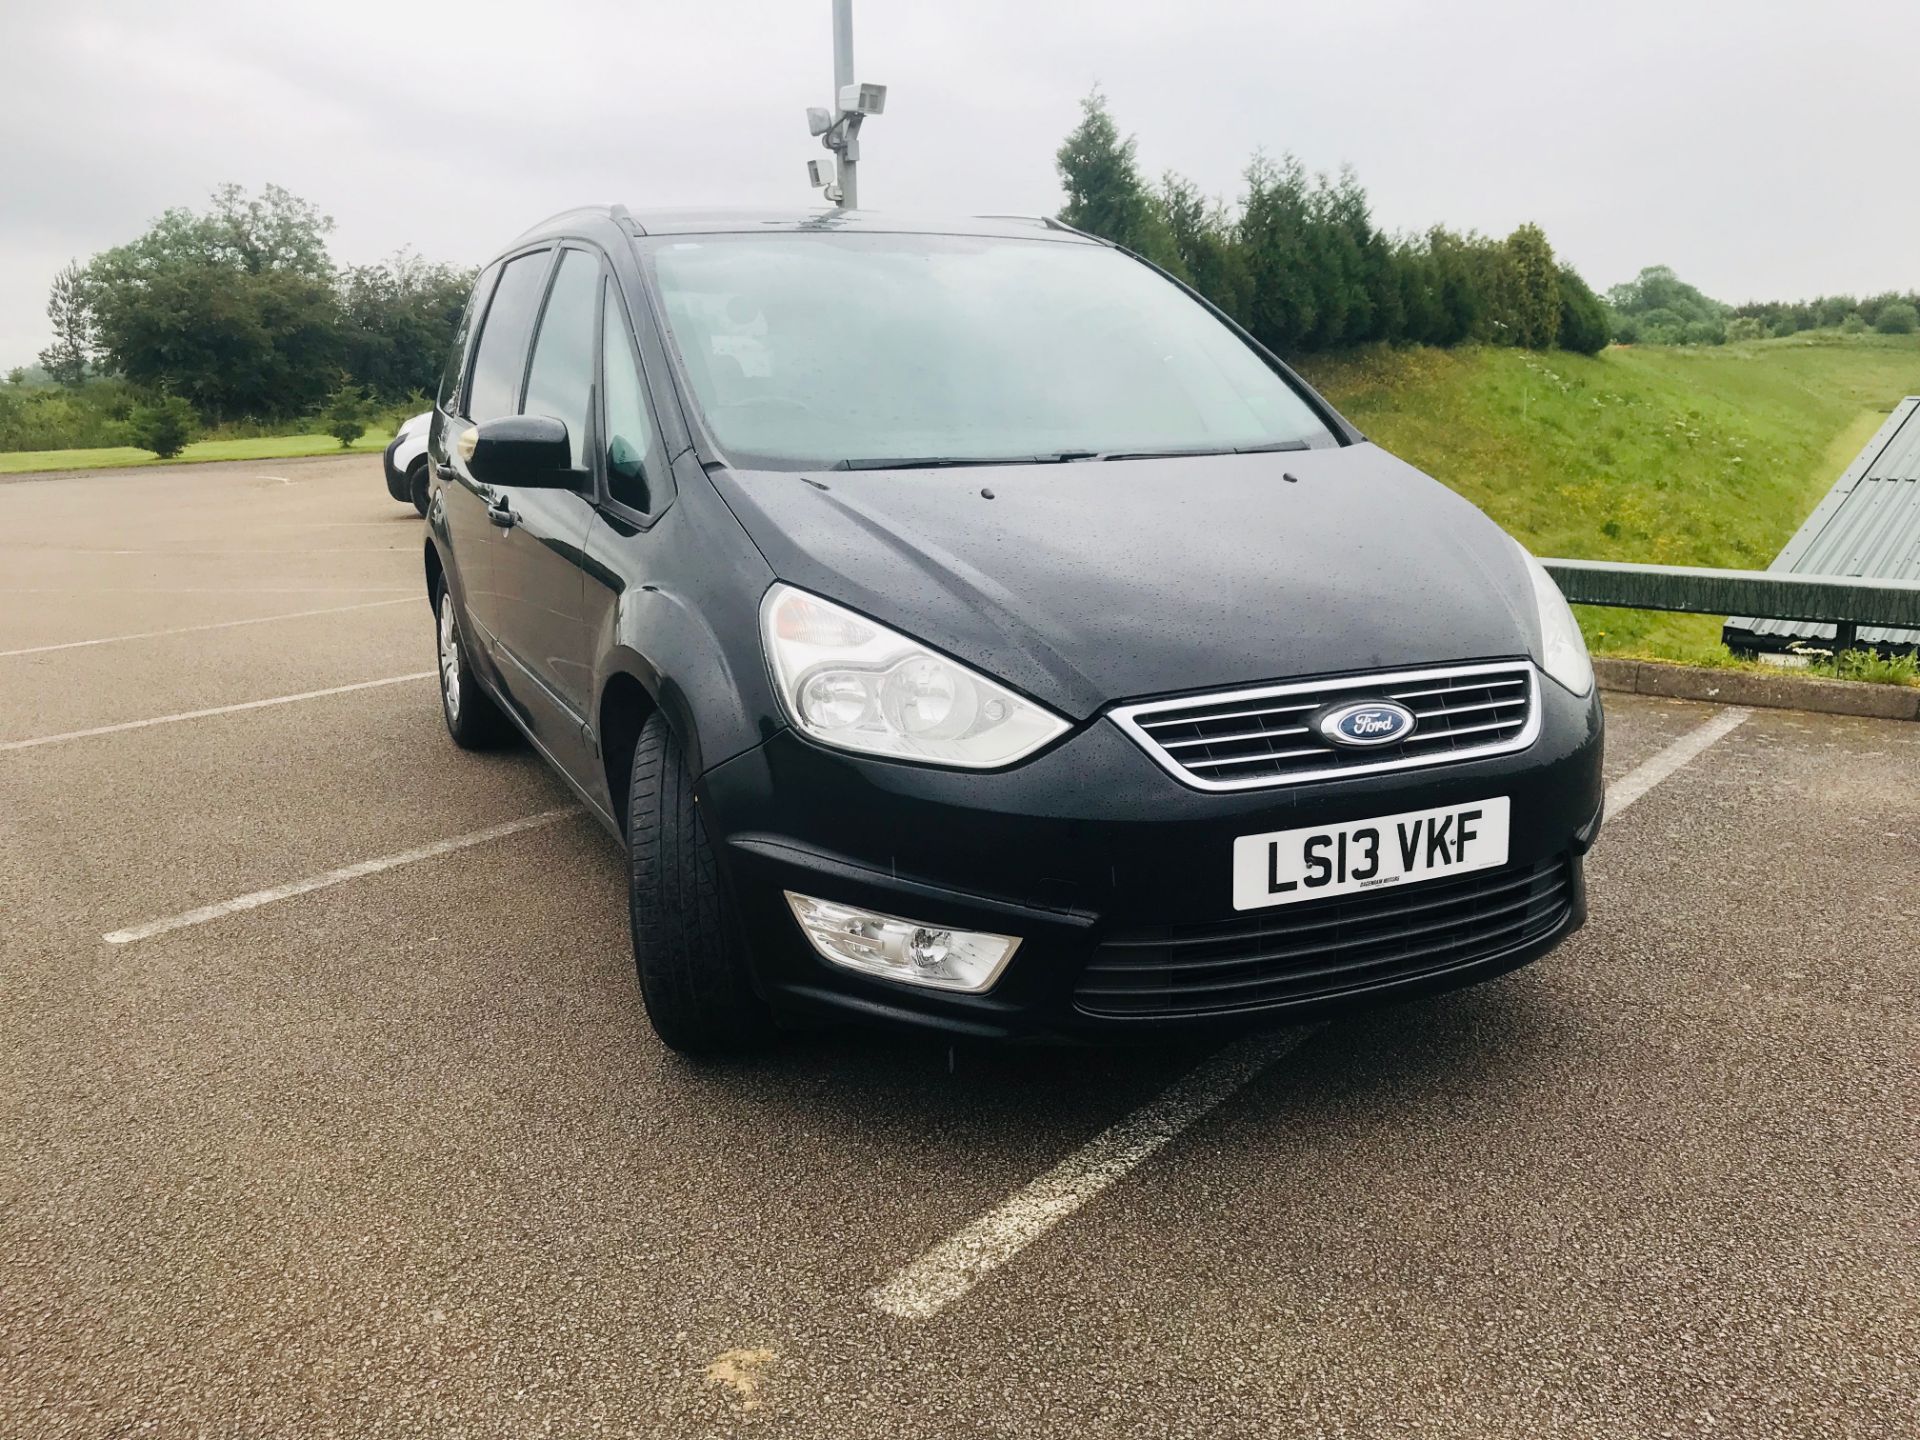 ON SALE FORD GALAXY 2.0TDCI POWER SHIFT "ZETEC" 7 SEATER (13 REG) AIR CON - ELEC PACK - AUTOMATIC - Image 3 of 14